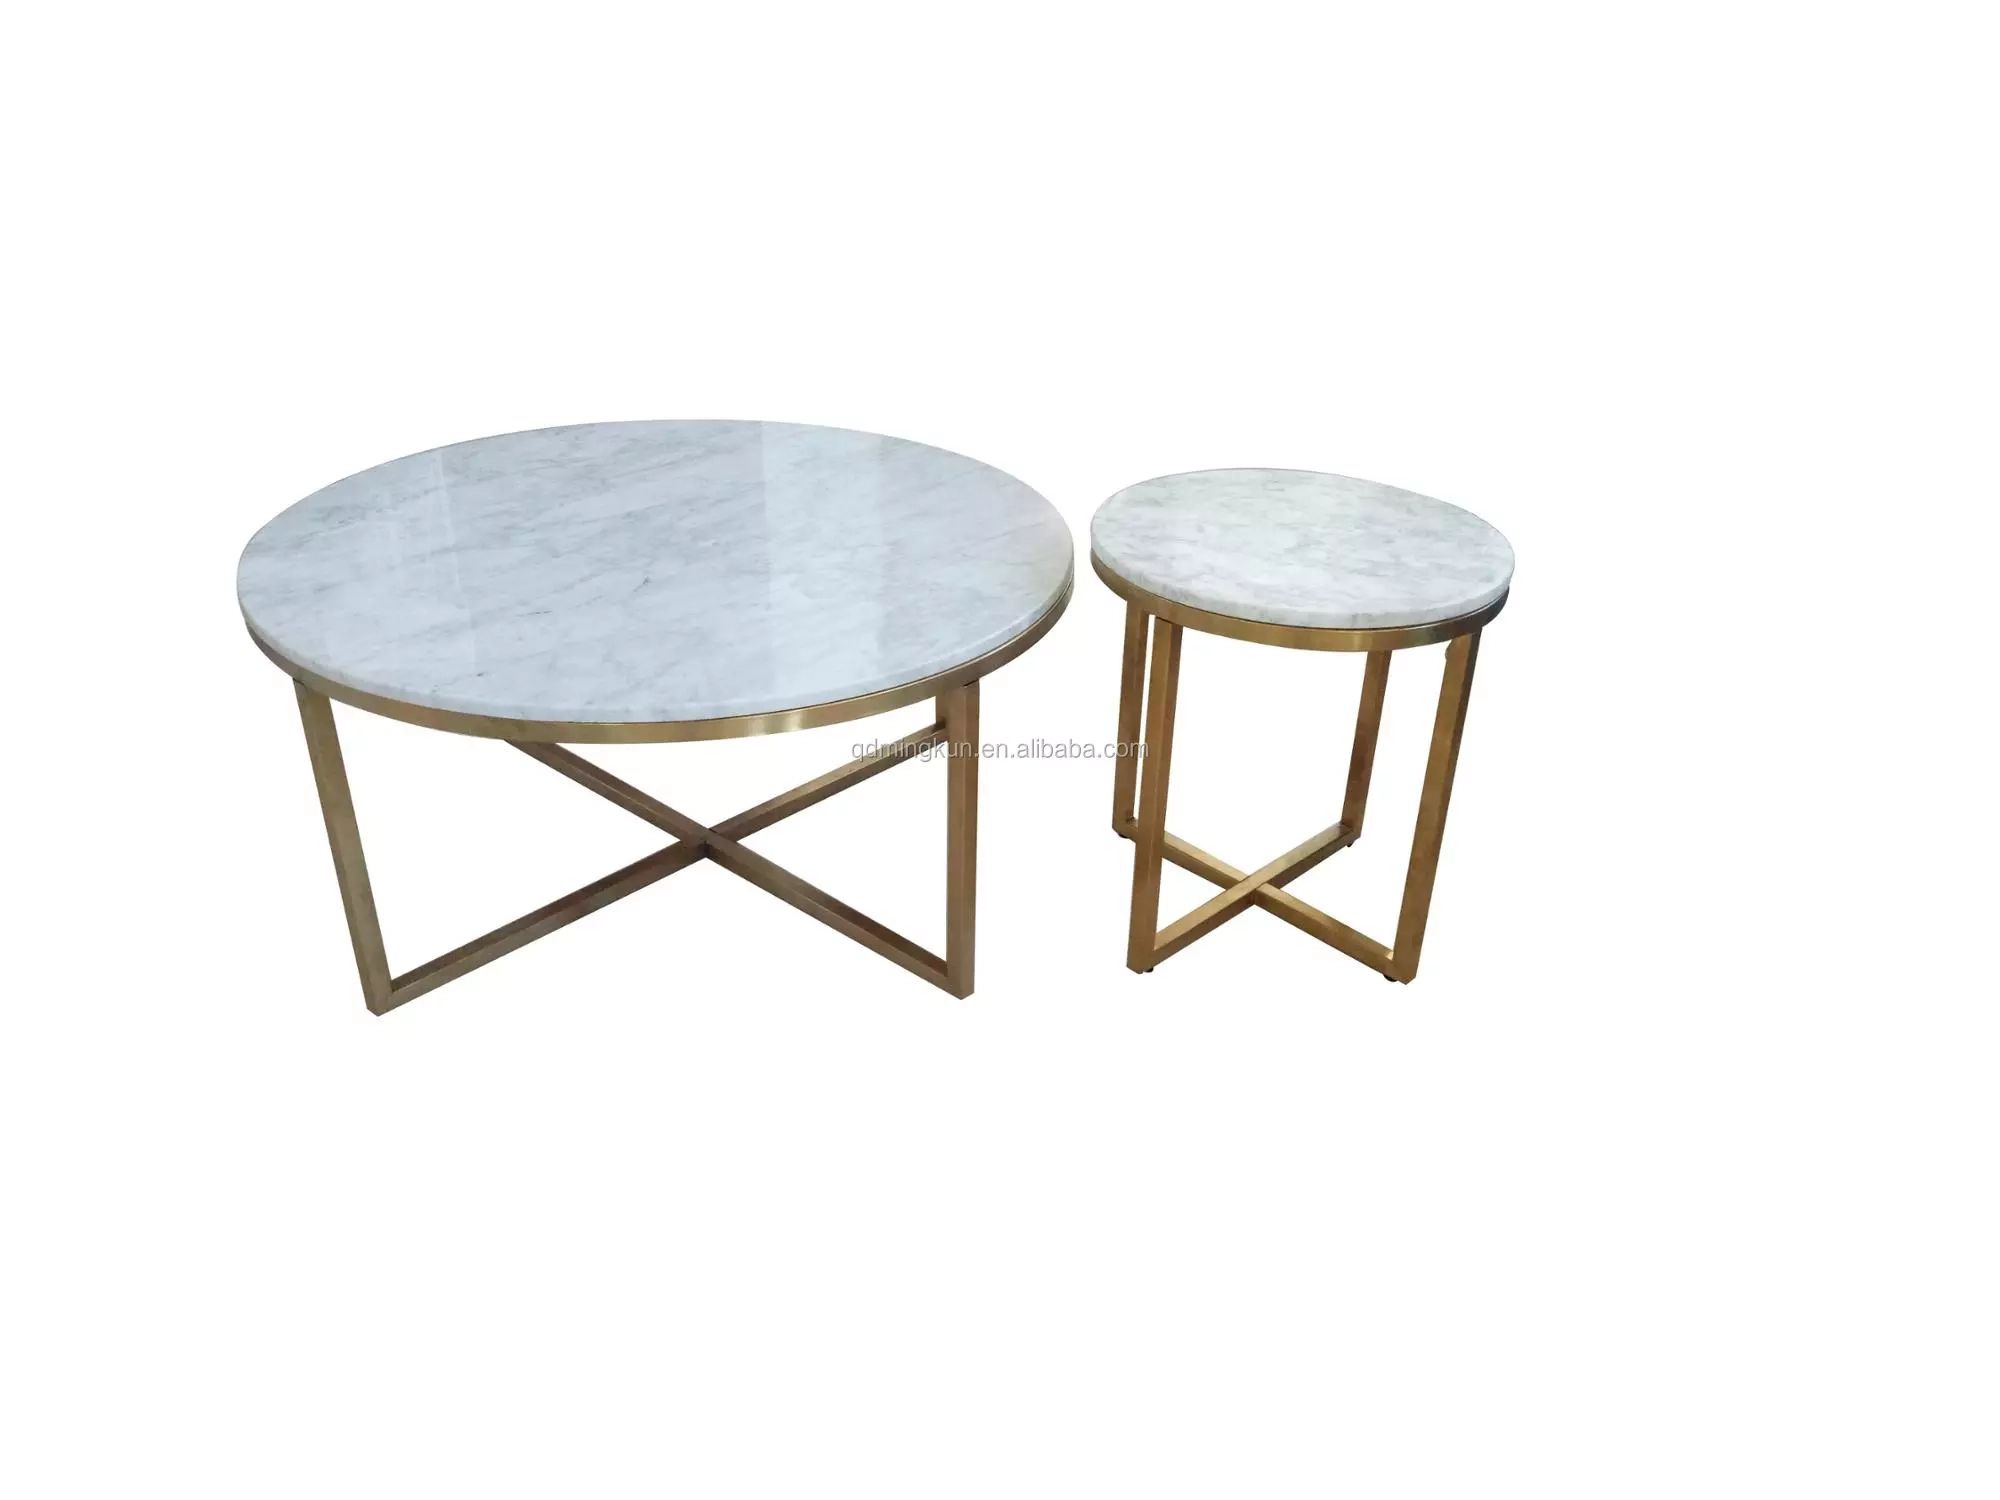 Modern Round Nesting Marble Metal Legs For Coffee Tables – Buy Modern Round  Nesting Coffee Tables,metal Legs For Coffee Table,marble Coffee Tables  Product On Alibaba Intended For Splayed Metal Legs Coffee Tables (View 18 of 20)